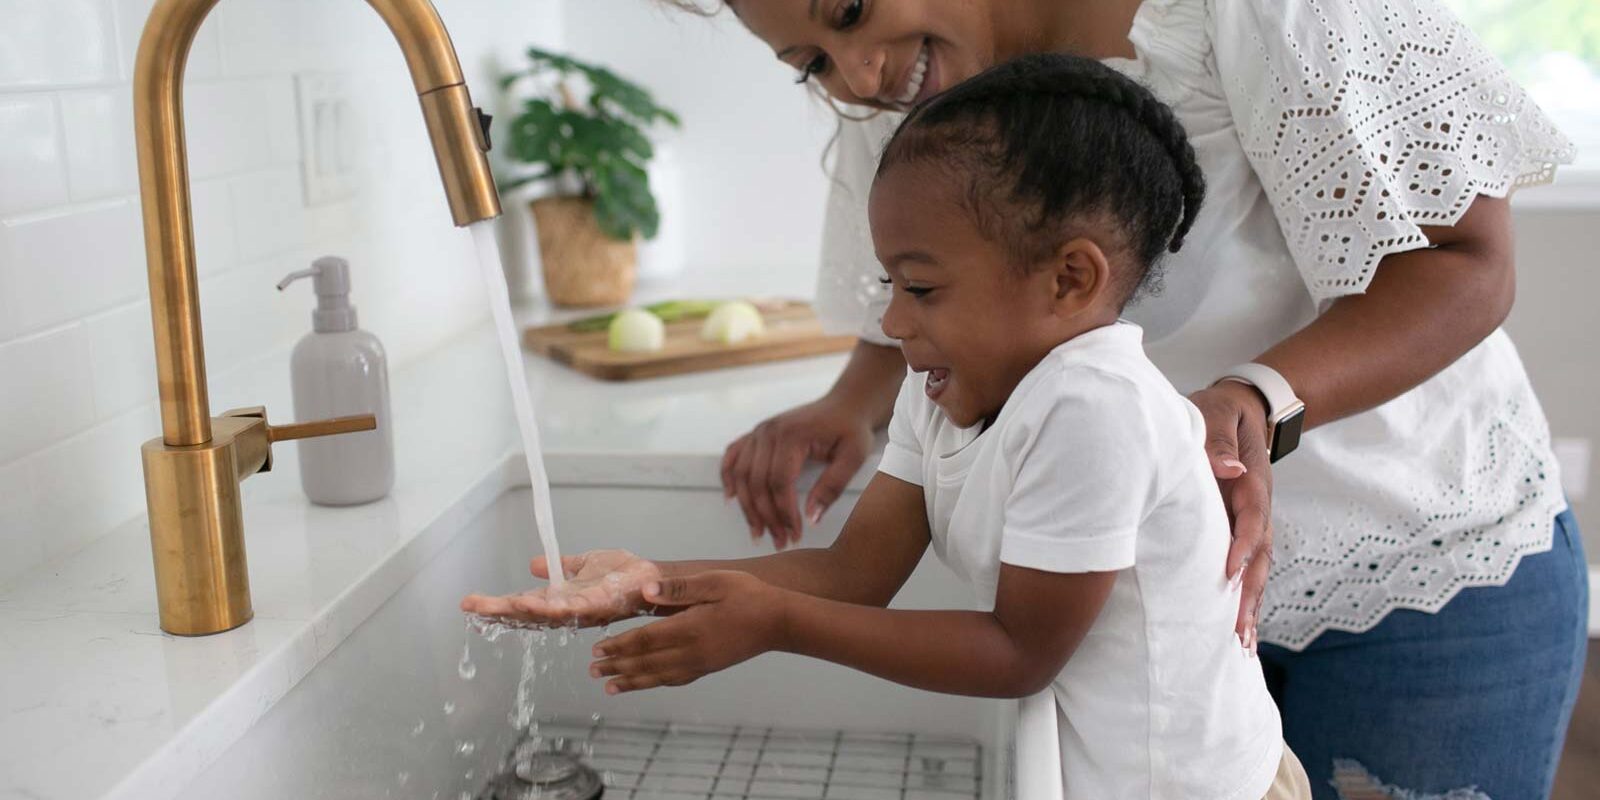 Parent and toddler in kitchen washing hands